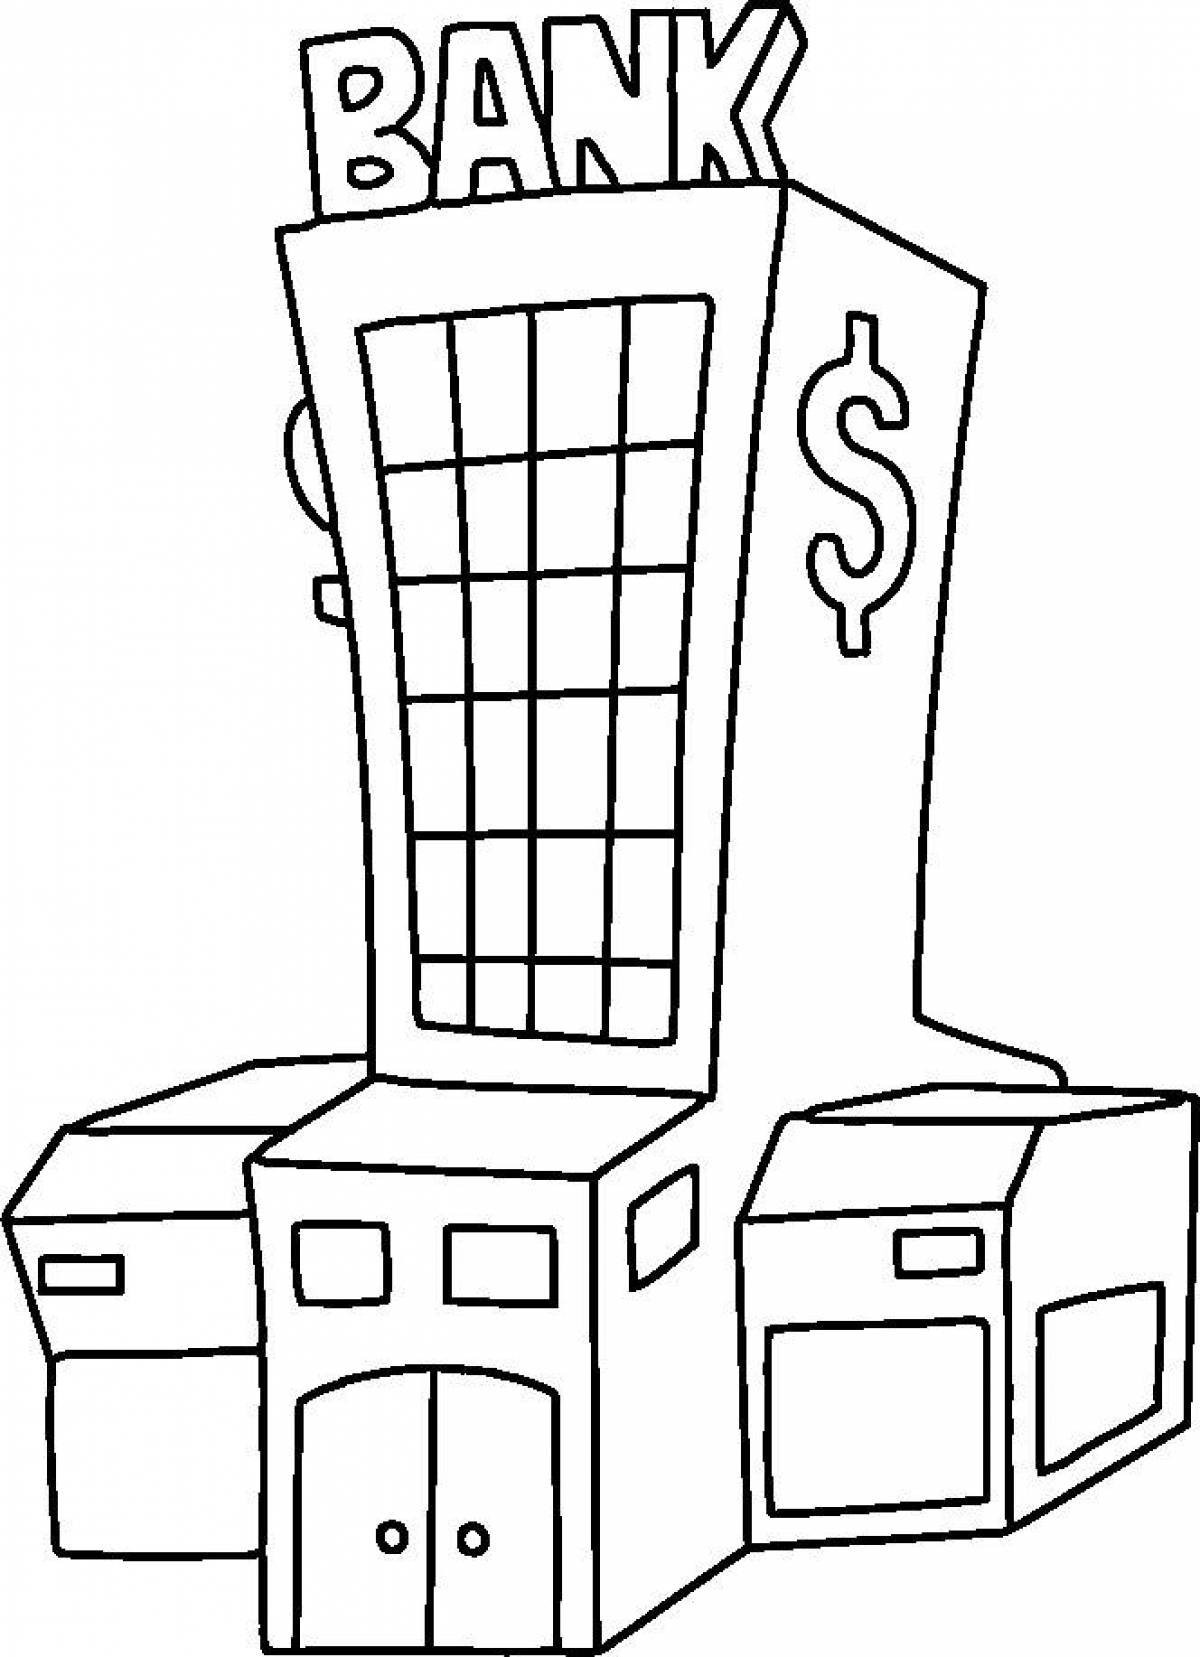 Coloring page energetic bank